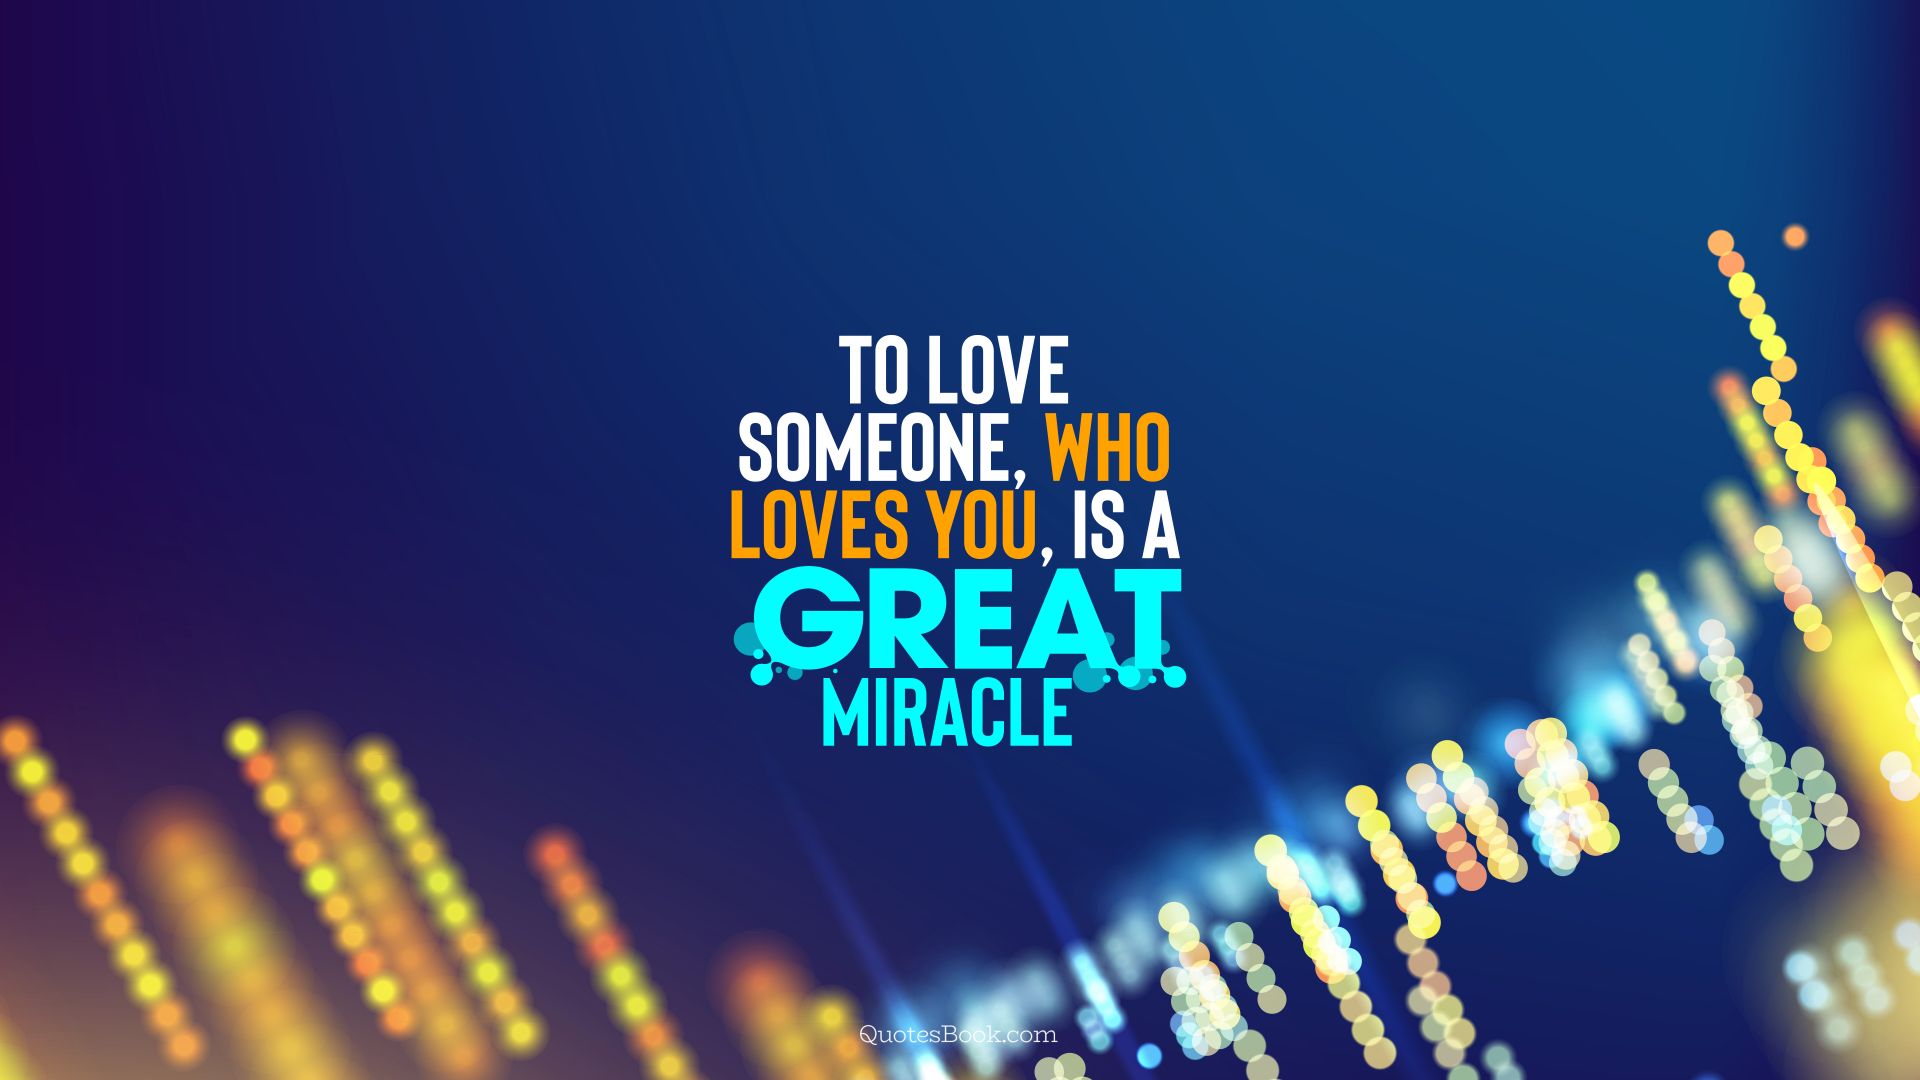 To love someone, who loves you, is a great miracle. - Quote by QuotesBook